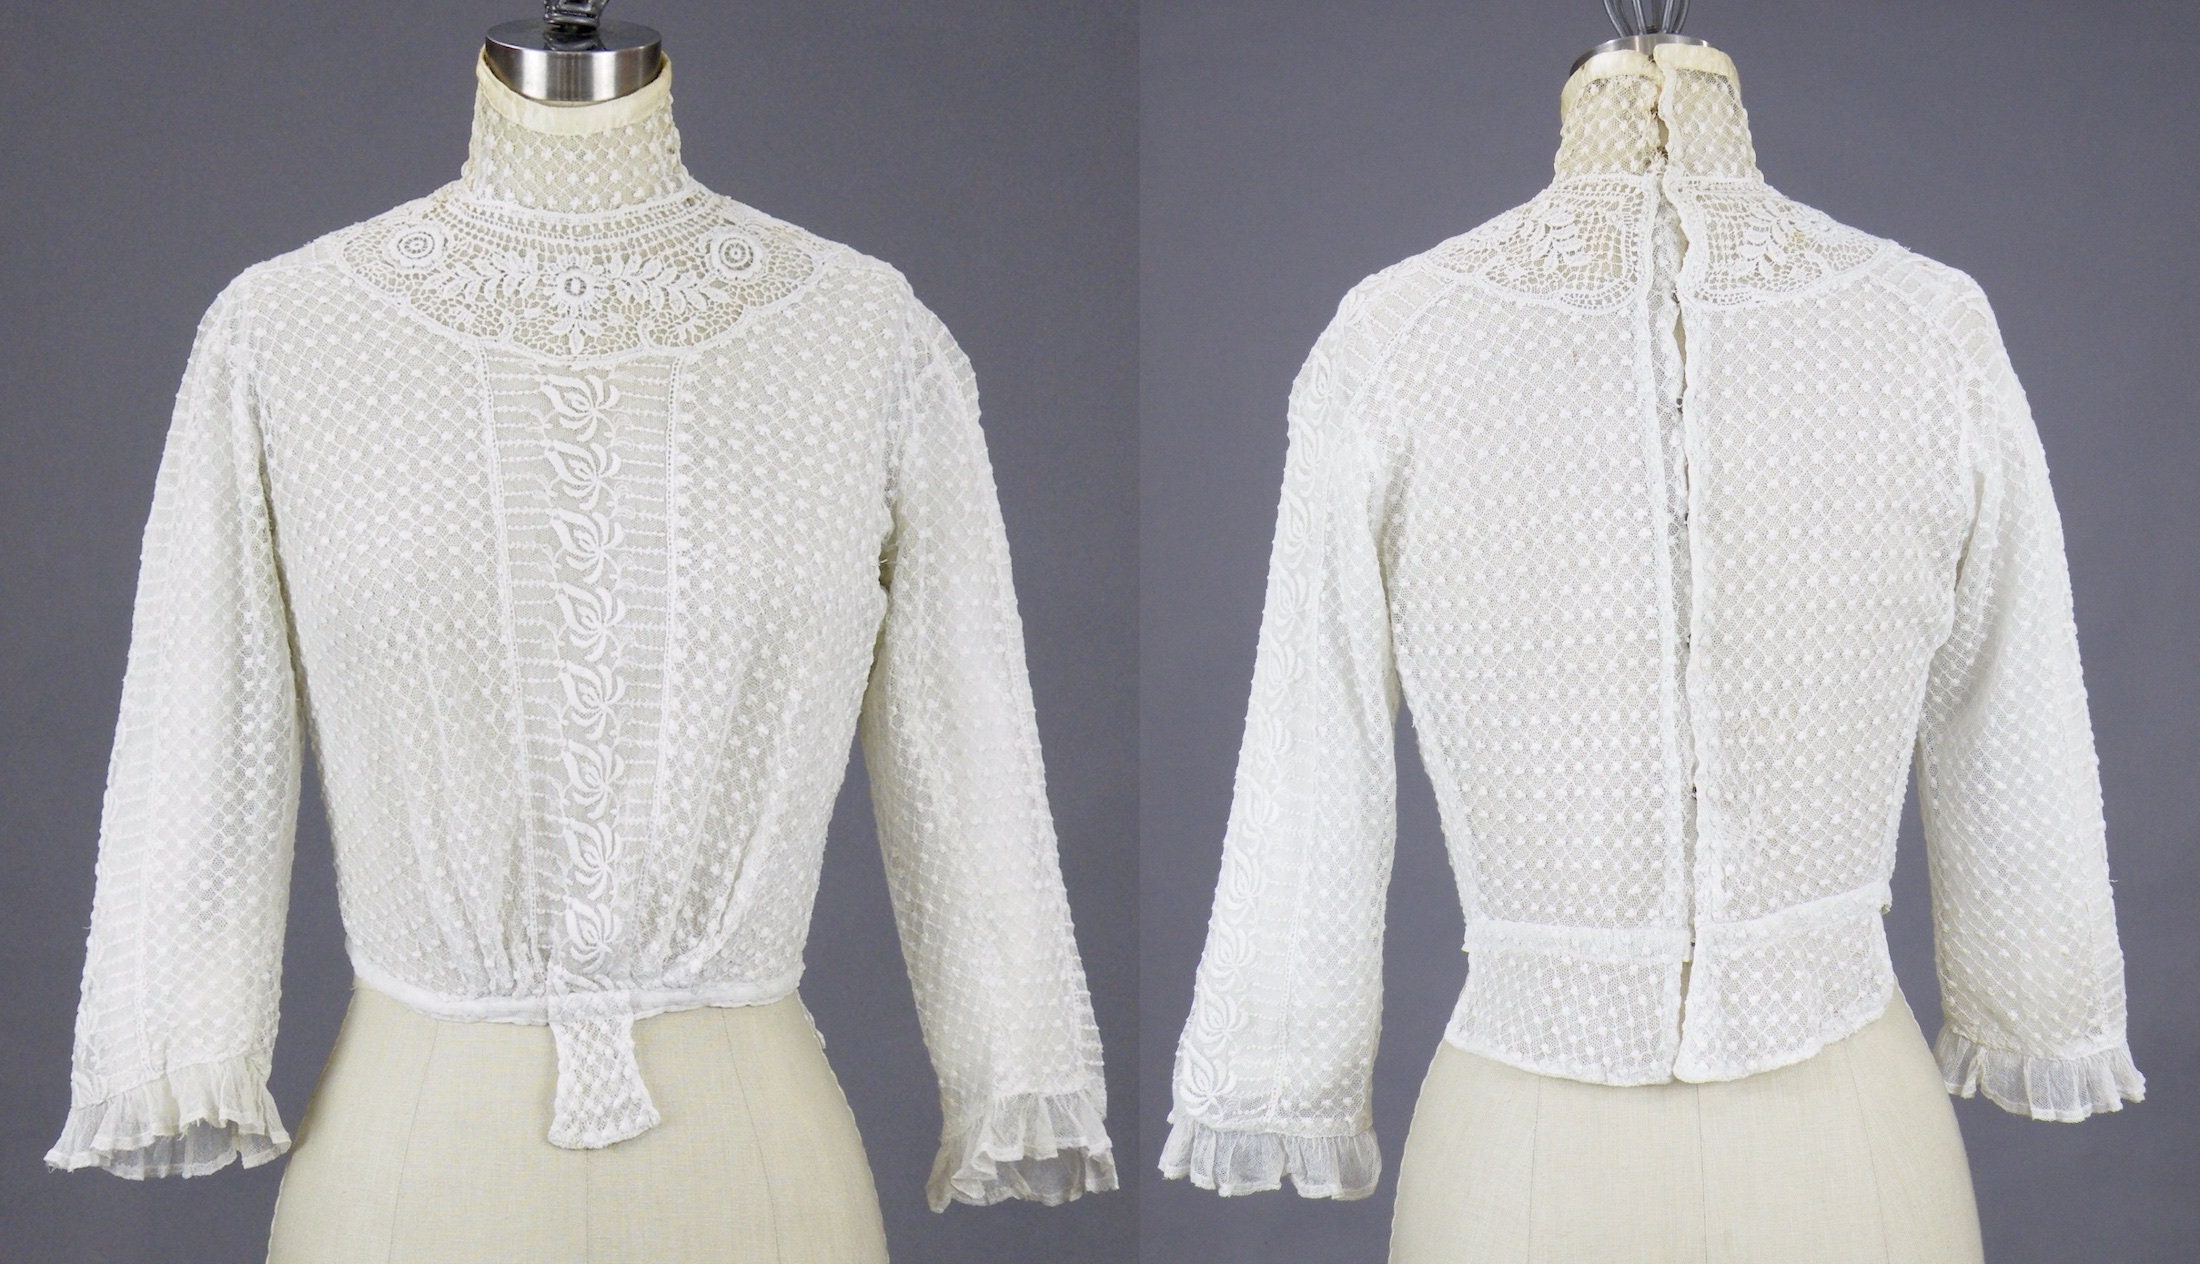 Edwardian Embroidered Net Mixed Lace Antique 1900s Blouse, XS - S